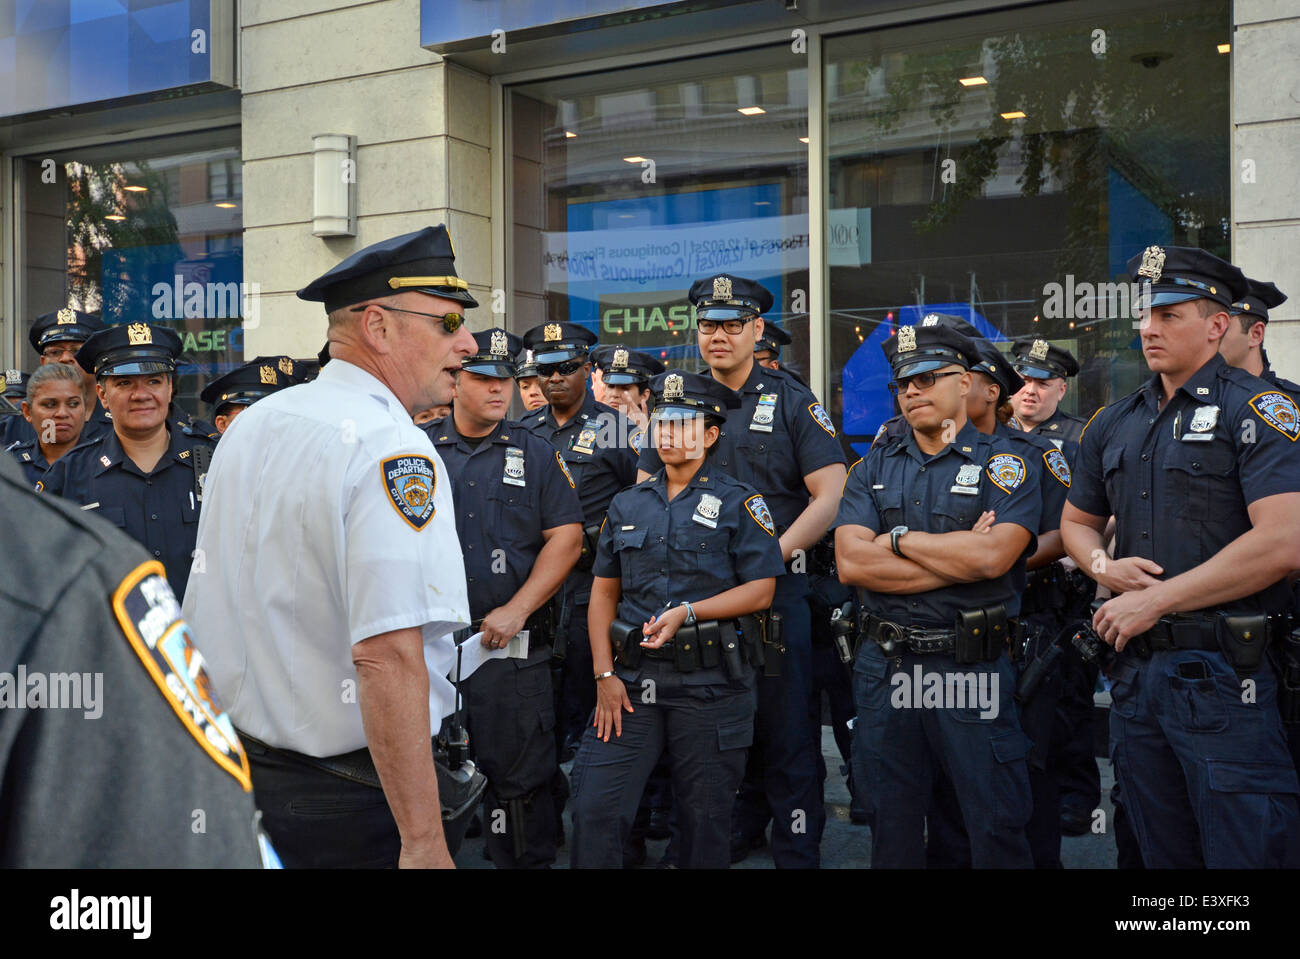 A group of policemen getting instructions before the Gay Pride Parade in New York City. Stock Photo